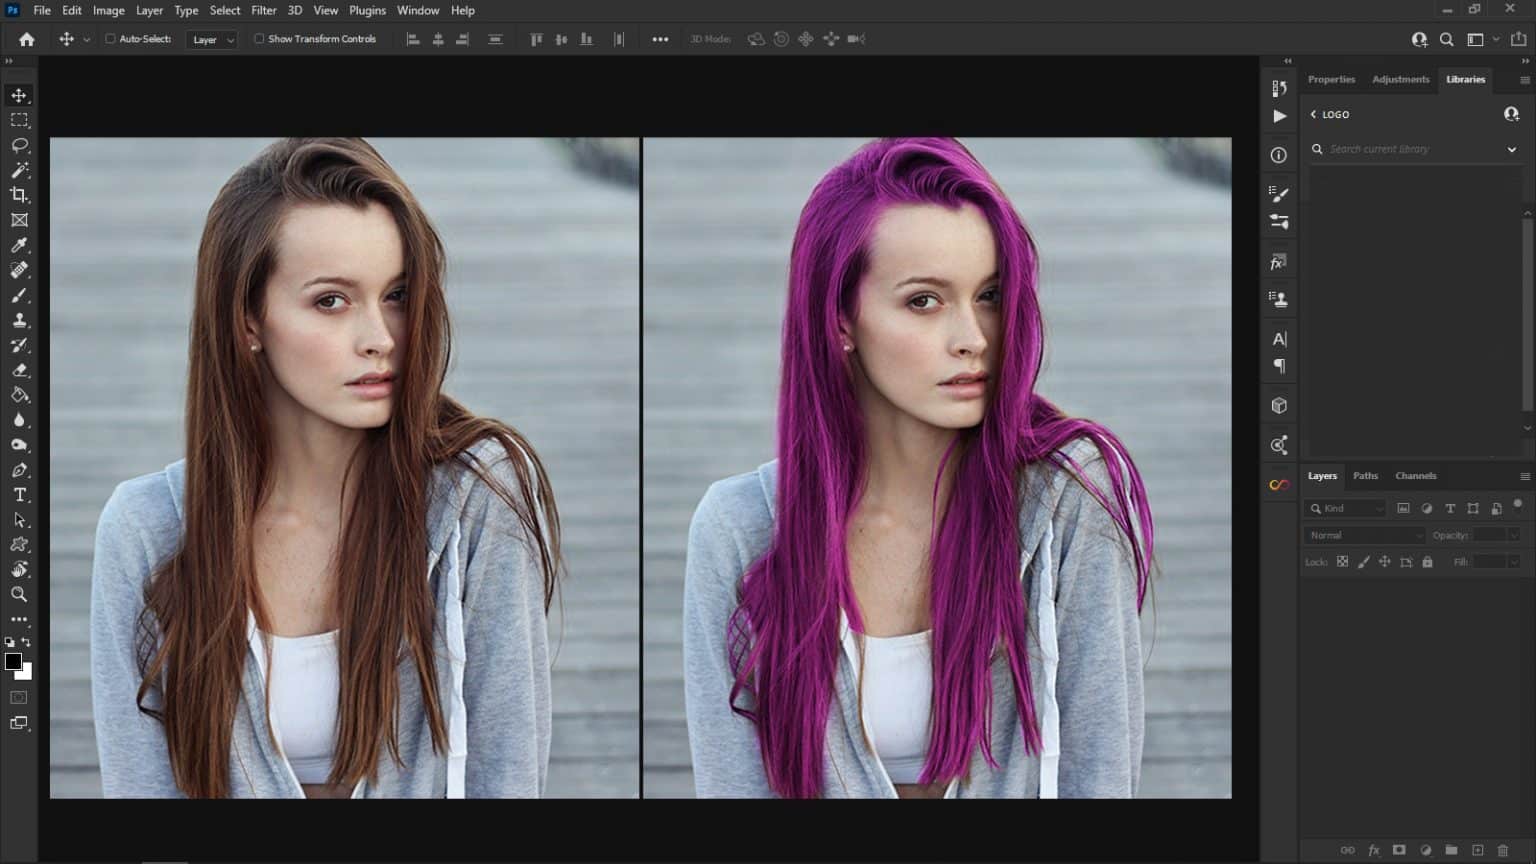 HOW TO CHANGE HAIR COLOR IN PHOTOSHOP Picfixs